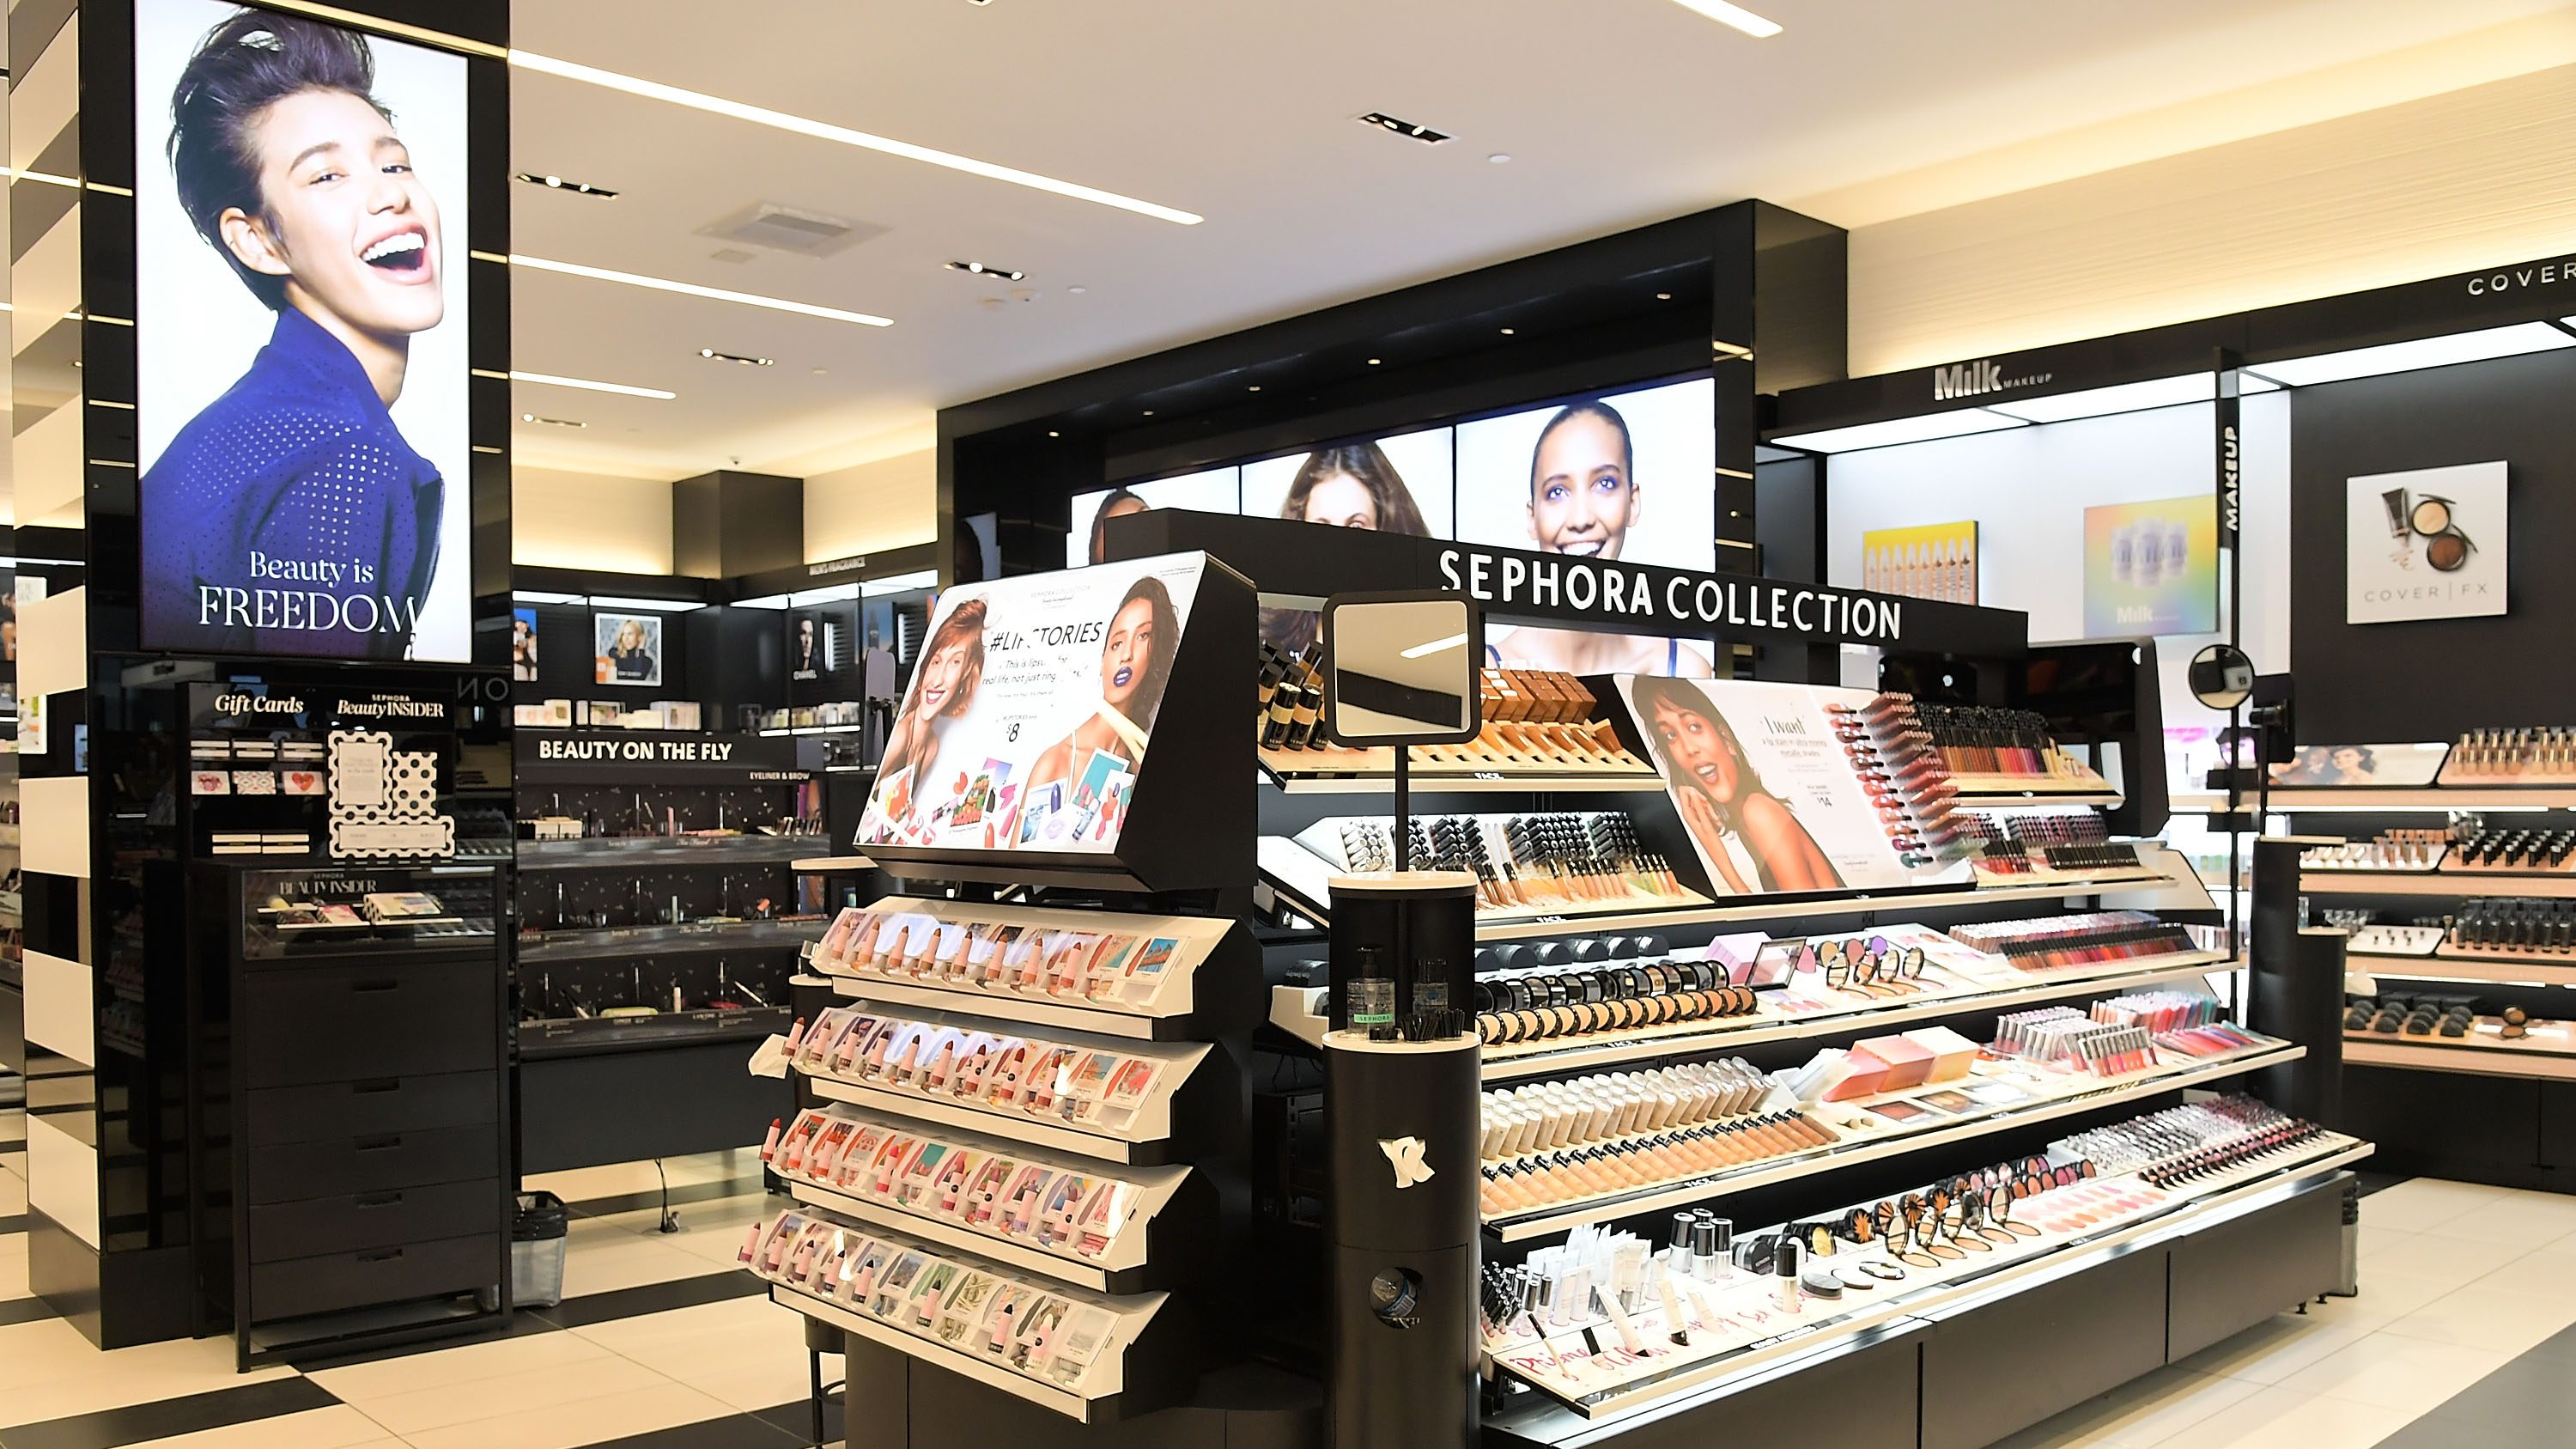 Even when the economy is down, people keep buying beauty products